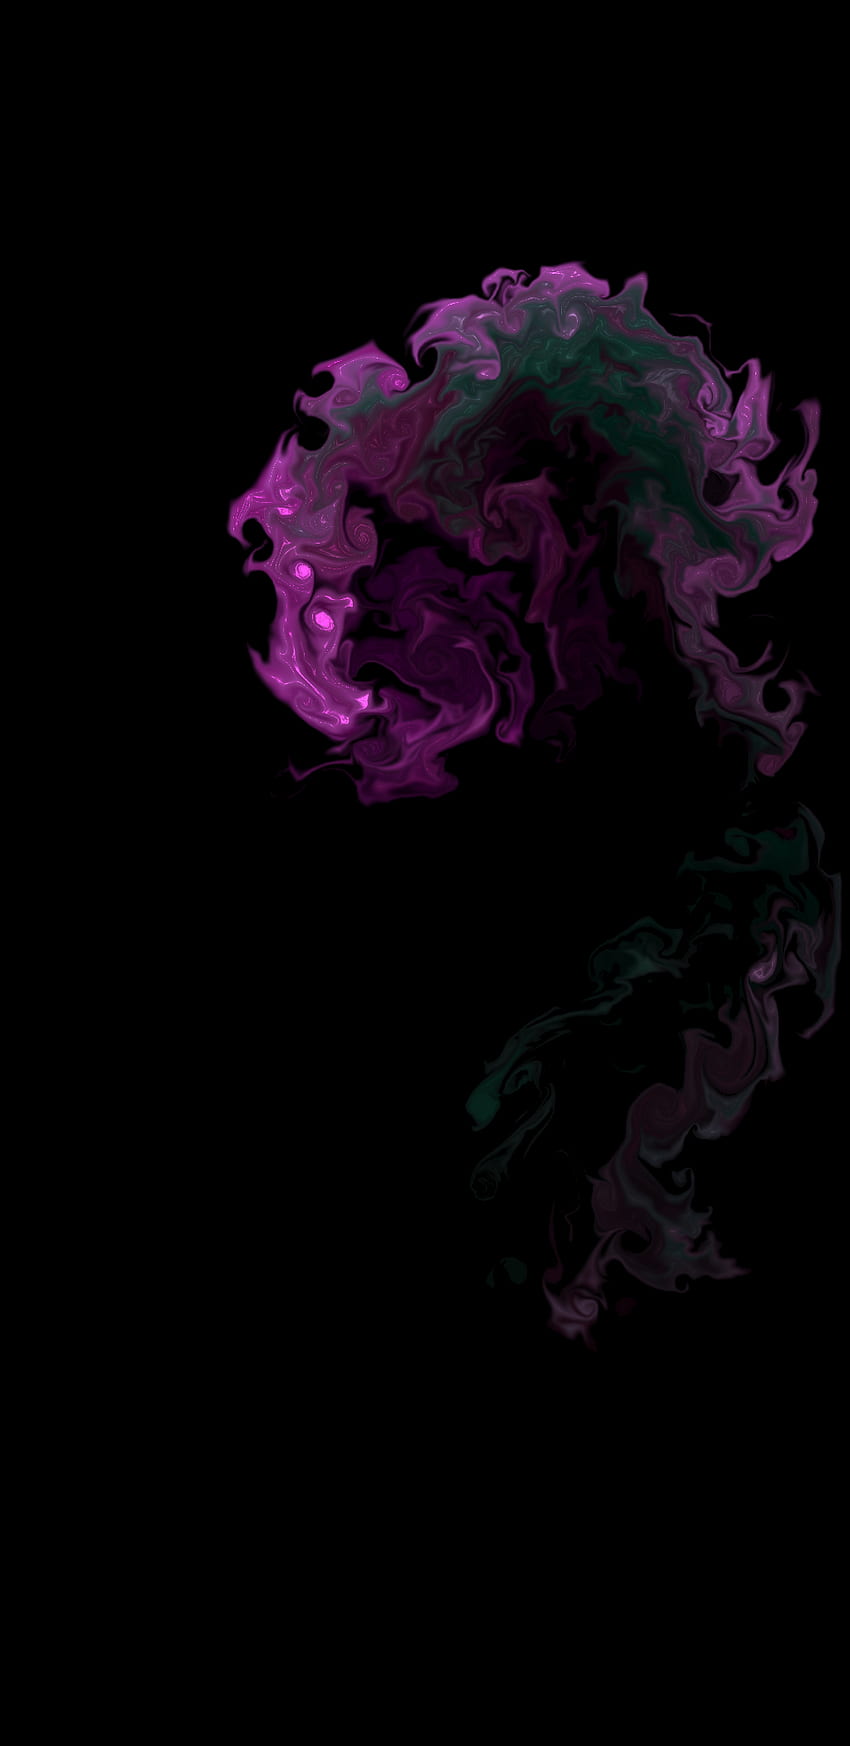 Found an app to make your own fluid AMOLED with HD phone wallpaper | Pxfuel